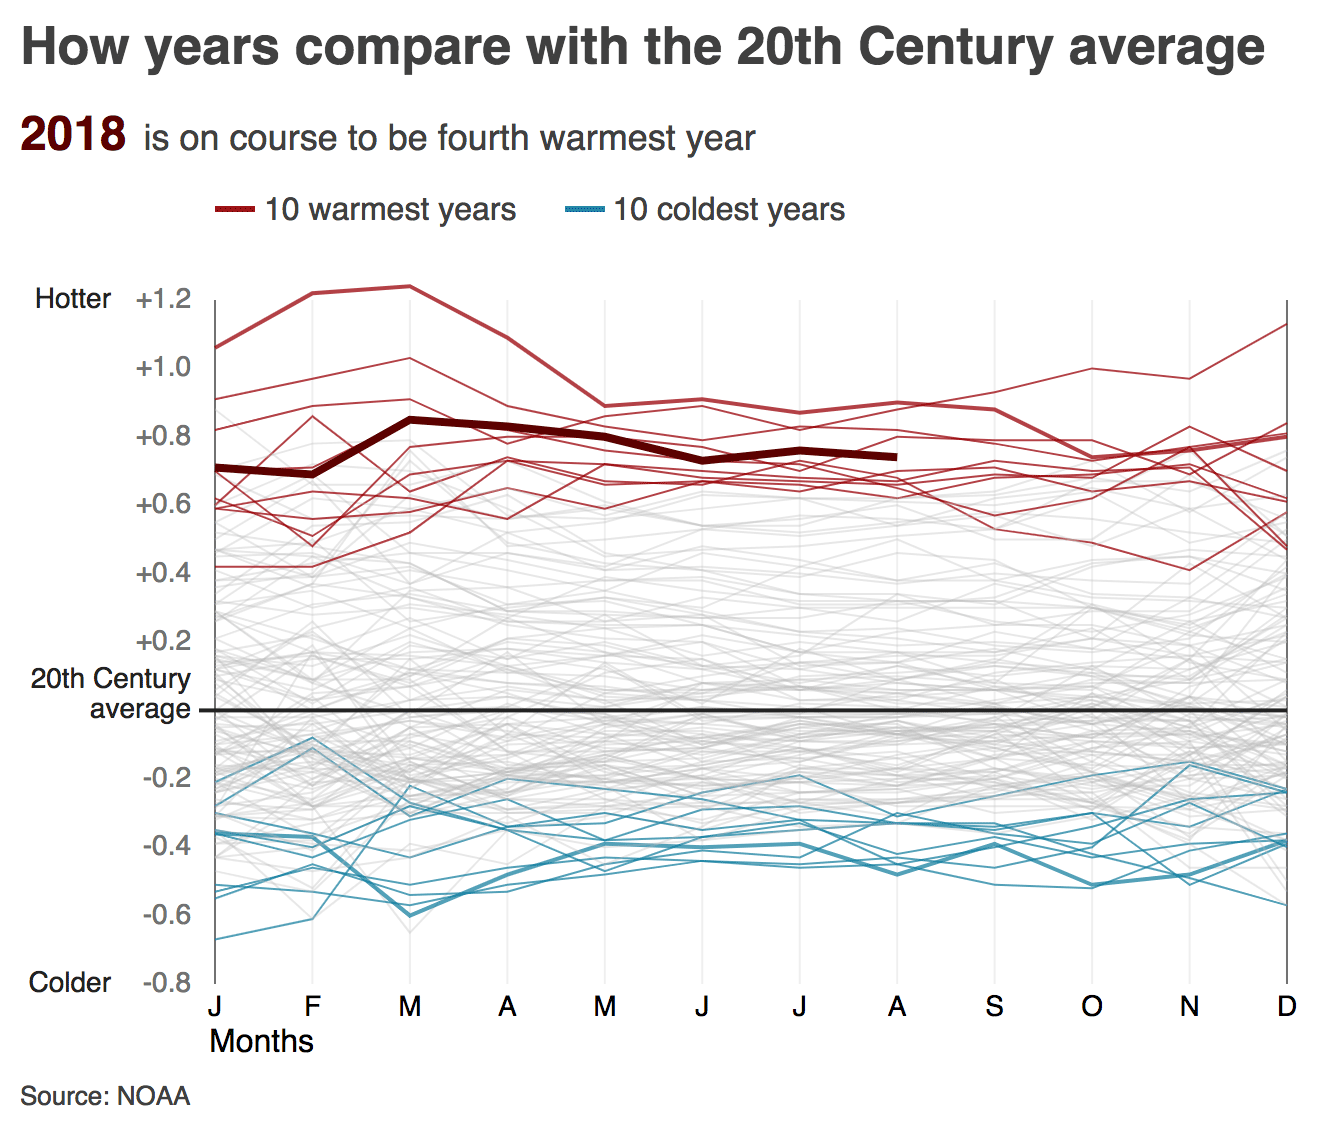 Animated chart showing that most of the coldest 10 years compared to the 20th century average were in the early 1900s, while the warmest years have all been since 2000